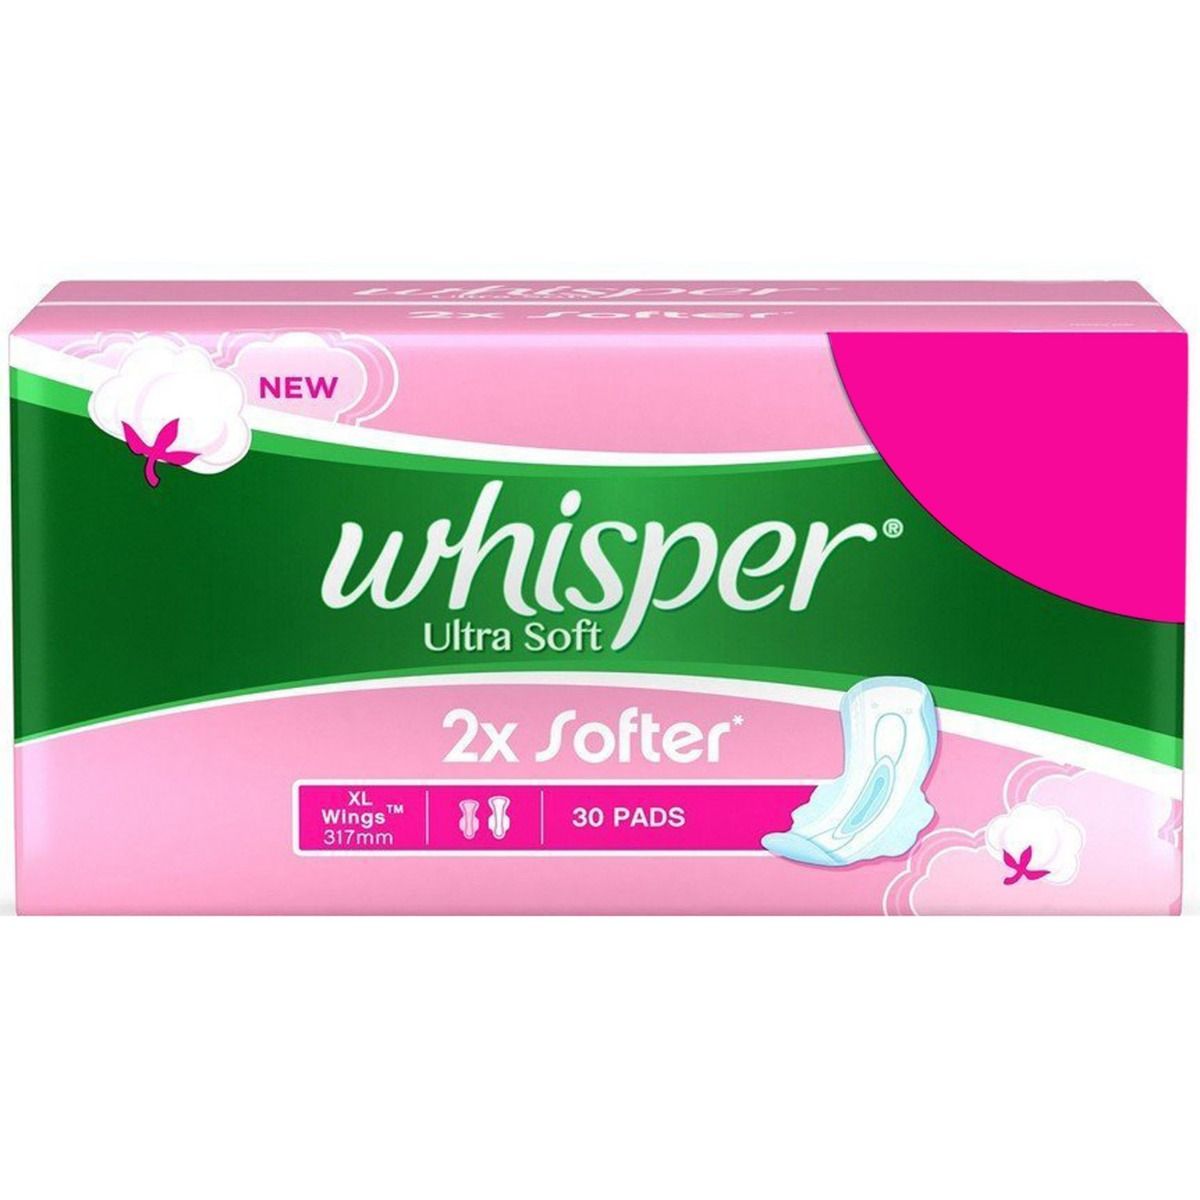 Whisper Ultra Soft 2x Softer Wings Sanitary Pads XL, 30 Count, Pack of 1 